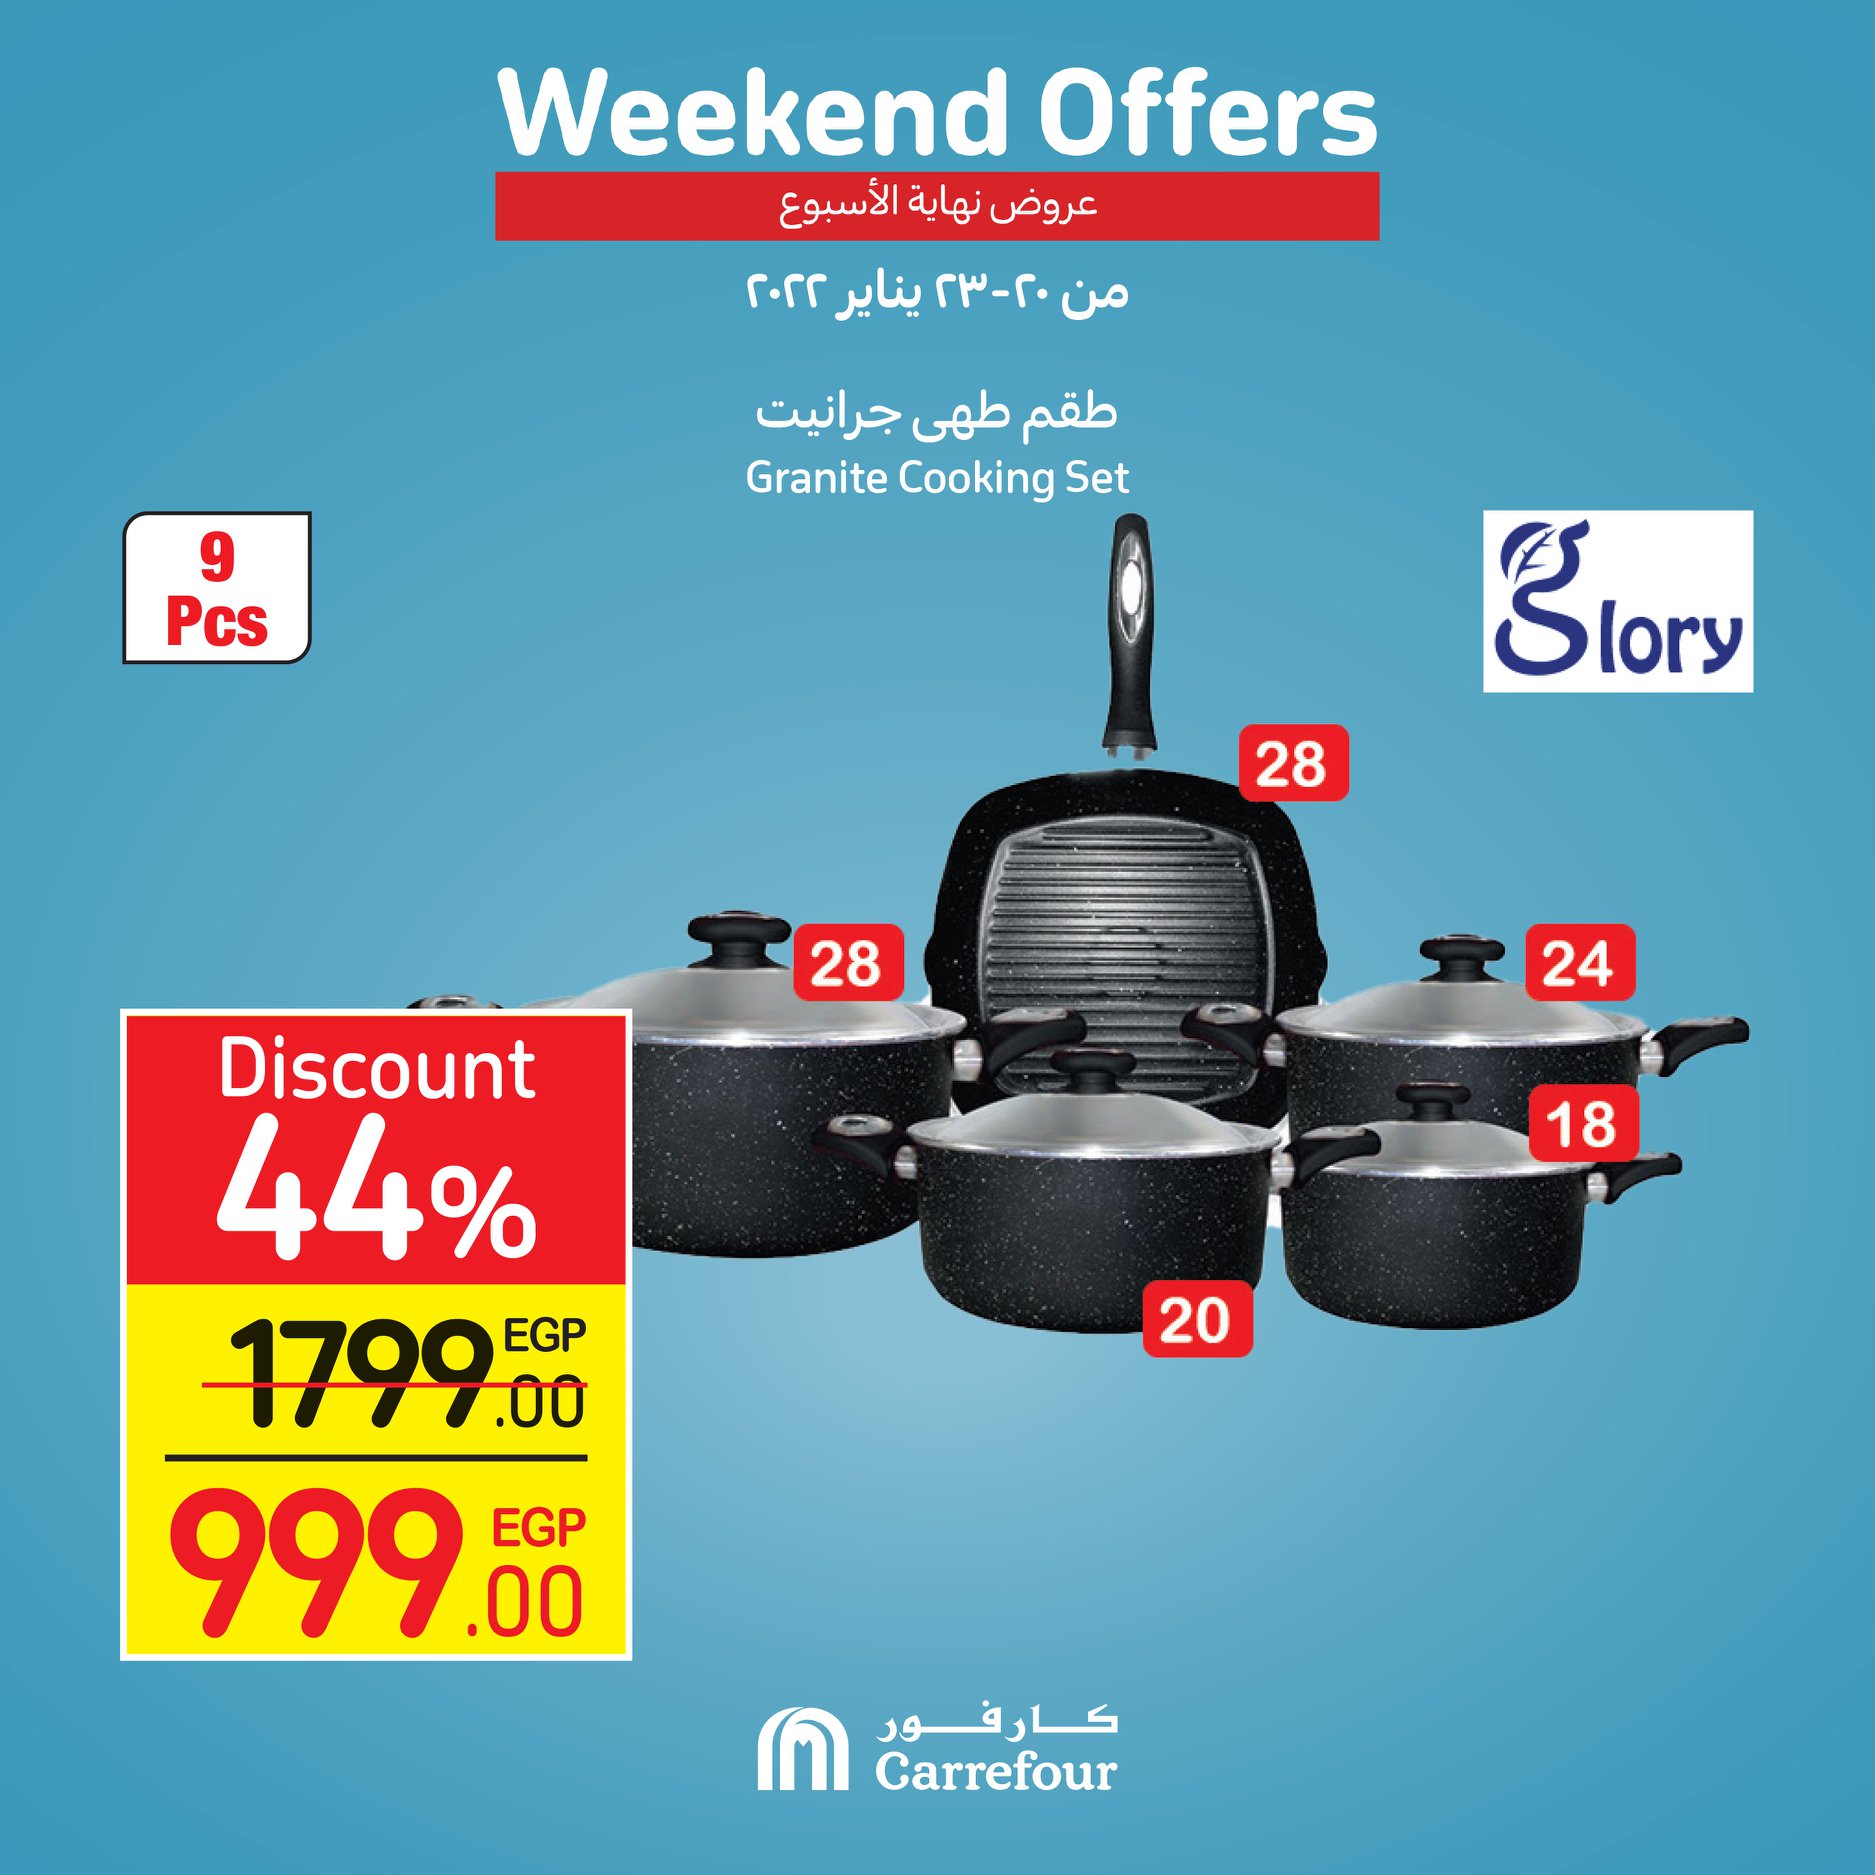 Watch Carrefour's gifts and surprises at Weekend and dirt cheap prices 21